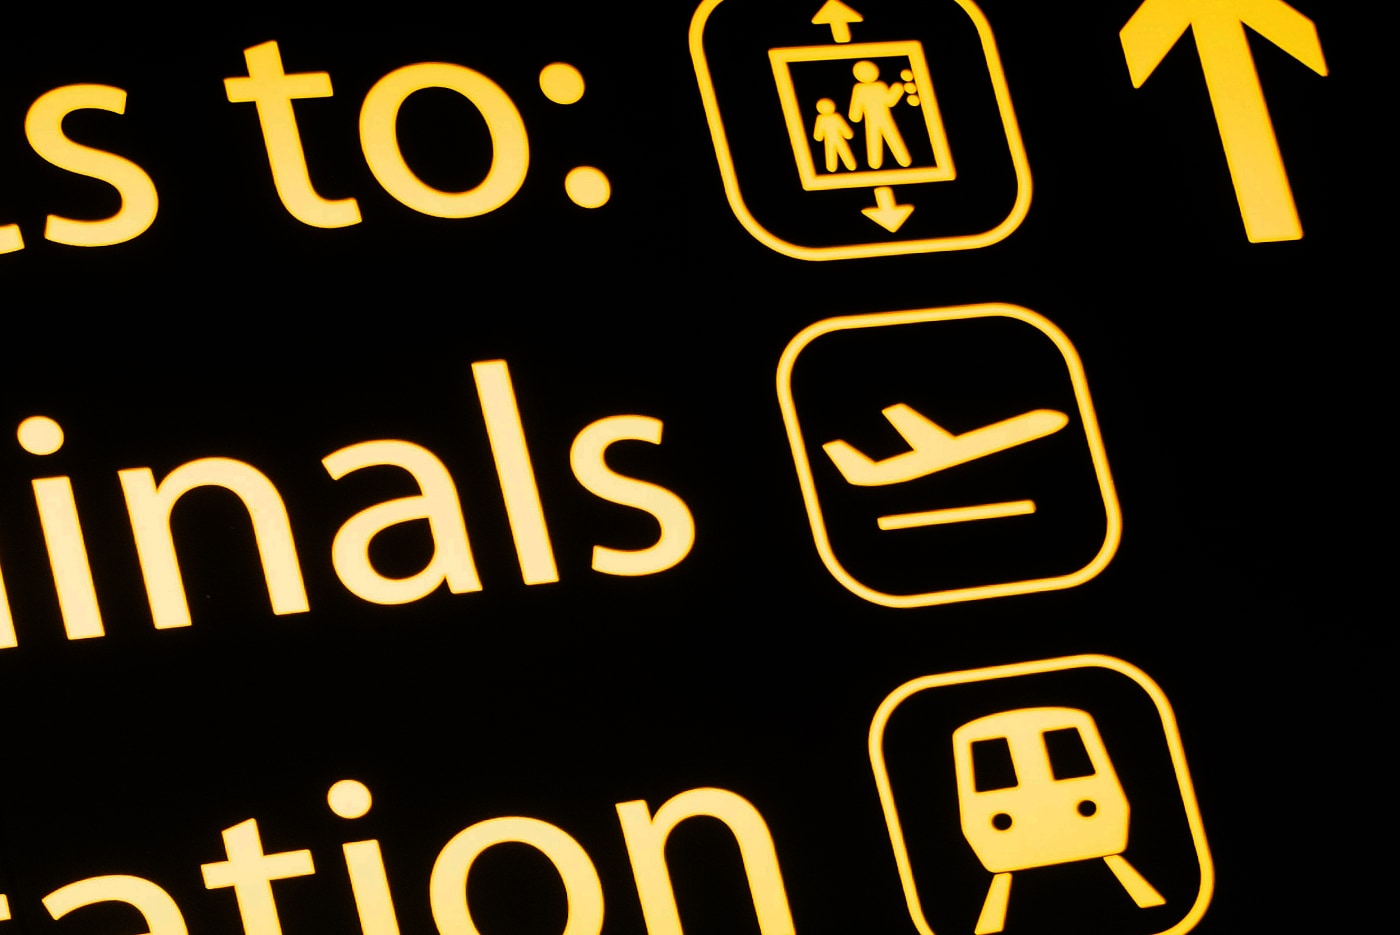 Gatwick Airport pictograms